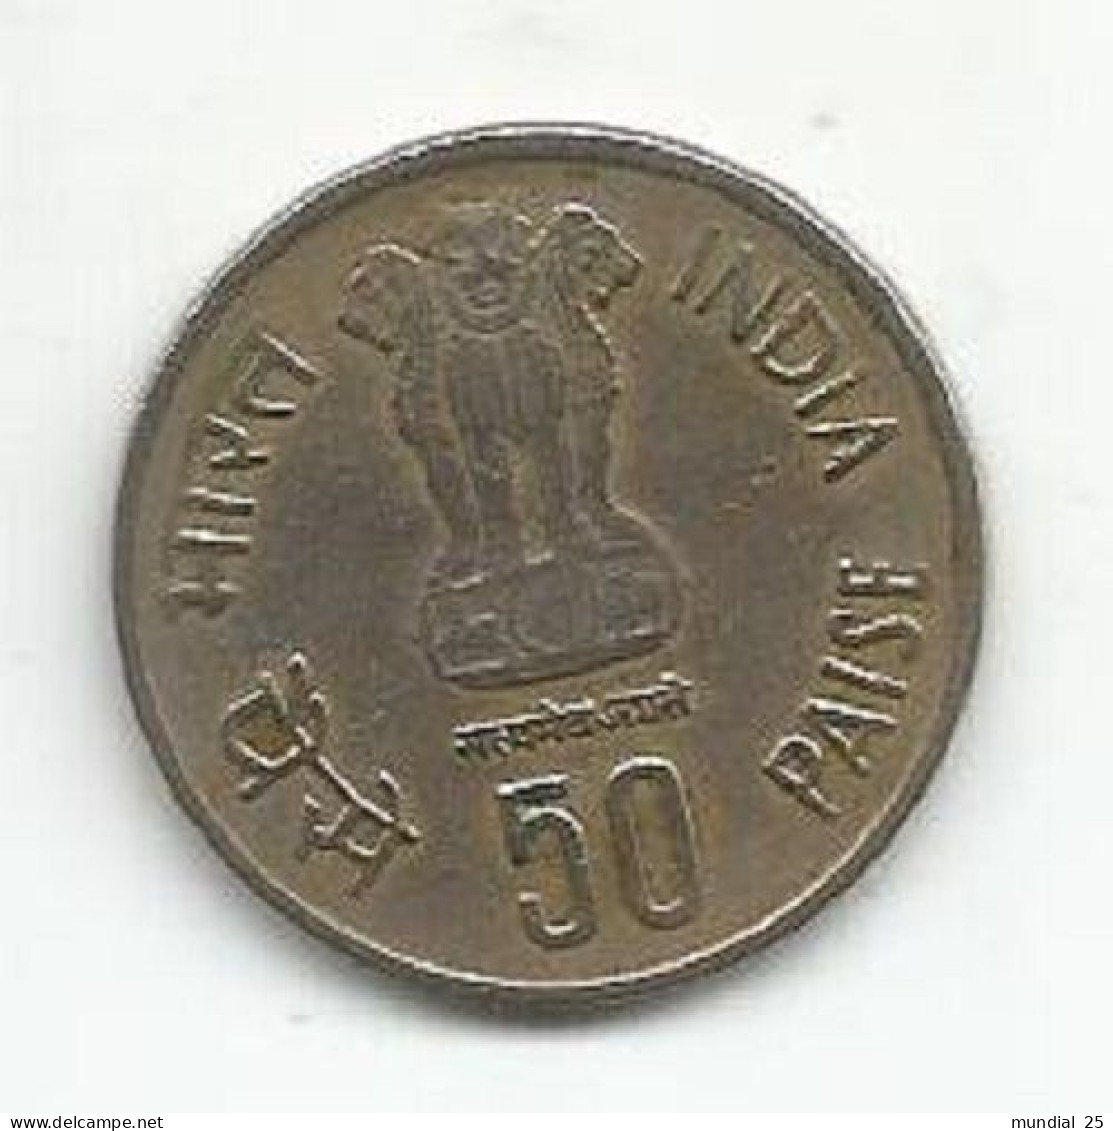 INDIA 50 PAISE N/D (1985) - GOLDEN JUBILEE OF RESERVE BANK OF INDIA - Inde